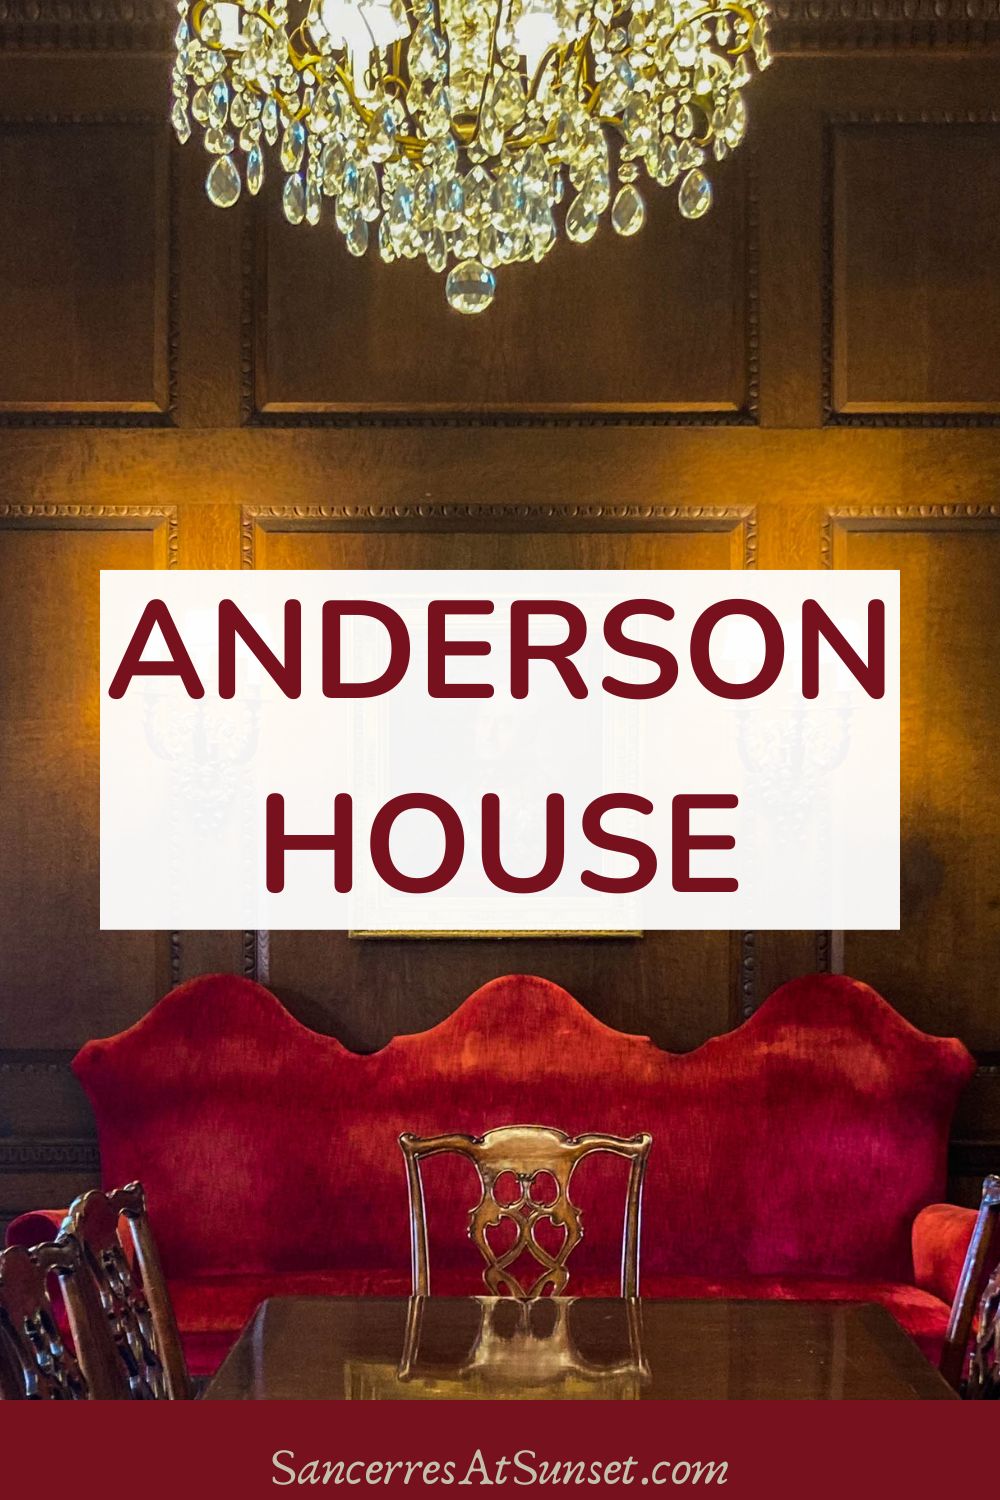 Anderson House in Washington, D.C.